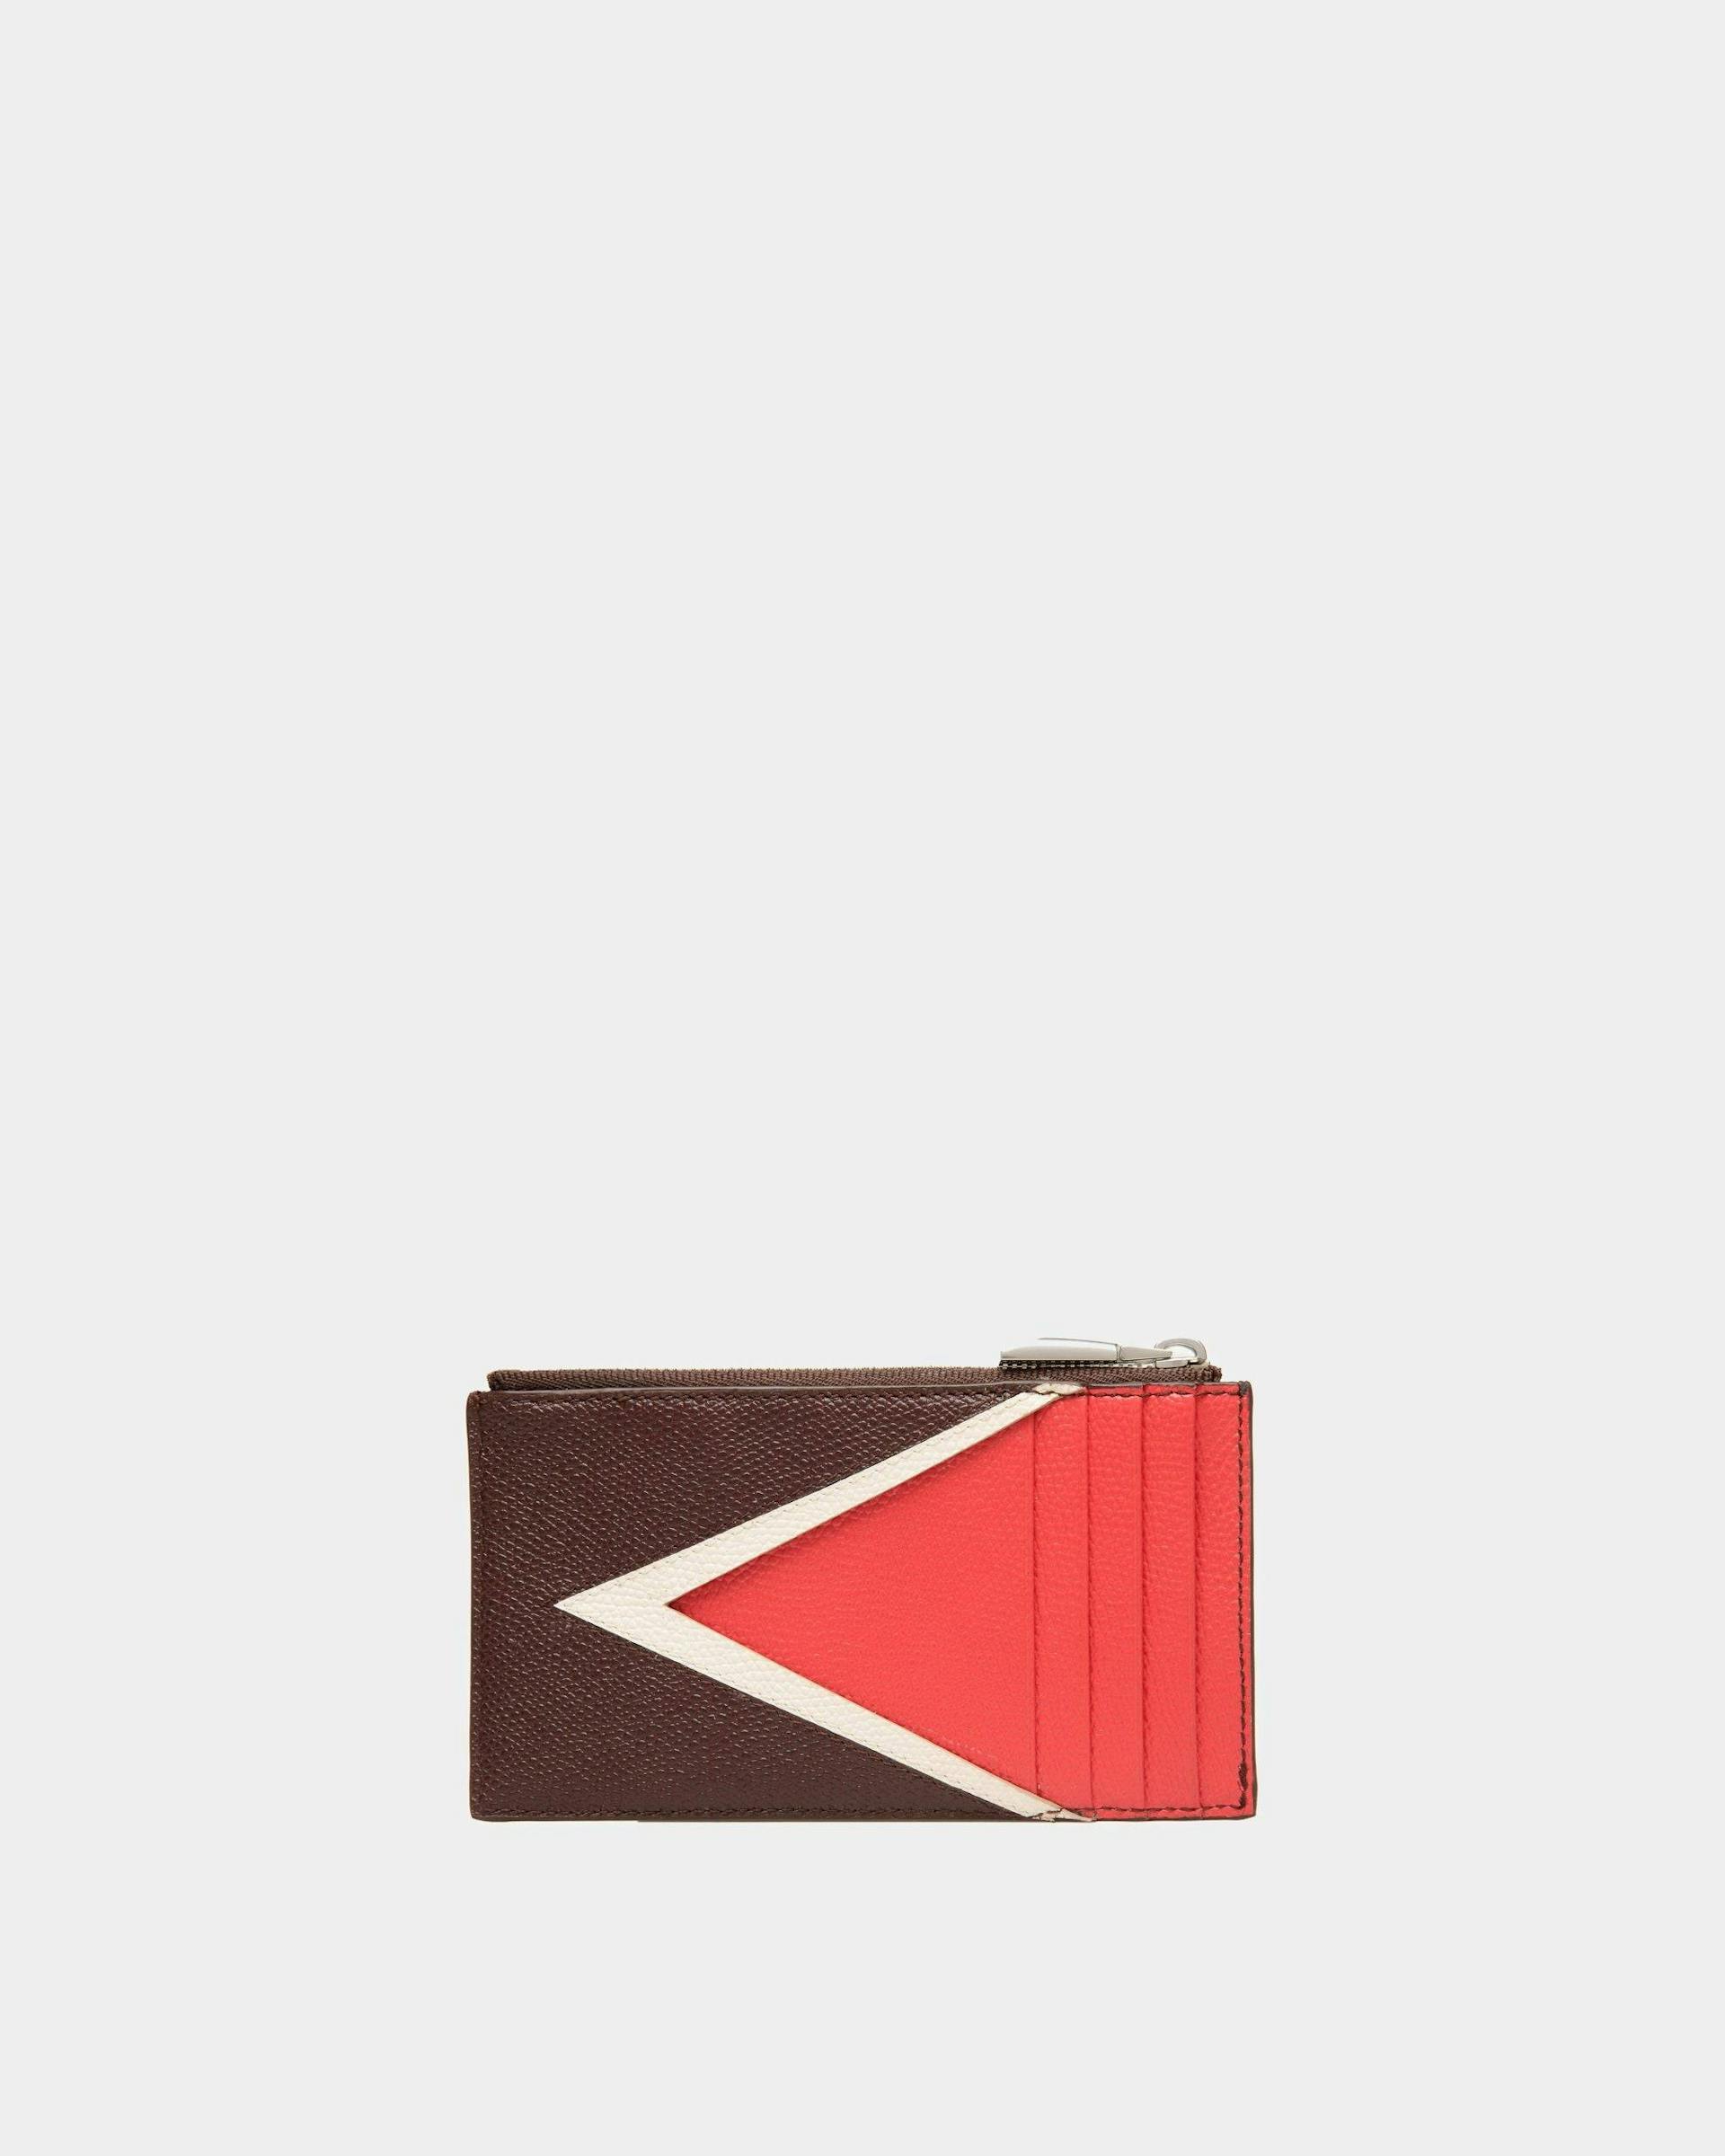 Men's Flag Coin Card Holder In Chestnut Brown And Red Embossed Leather | Bally | Still Life Back